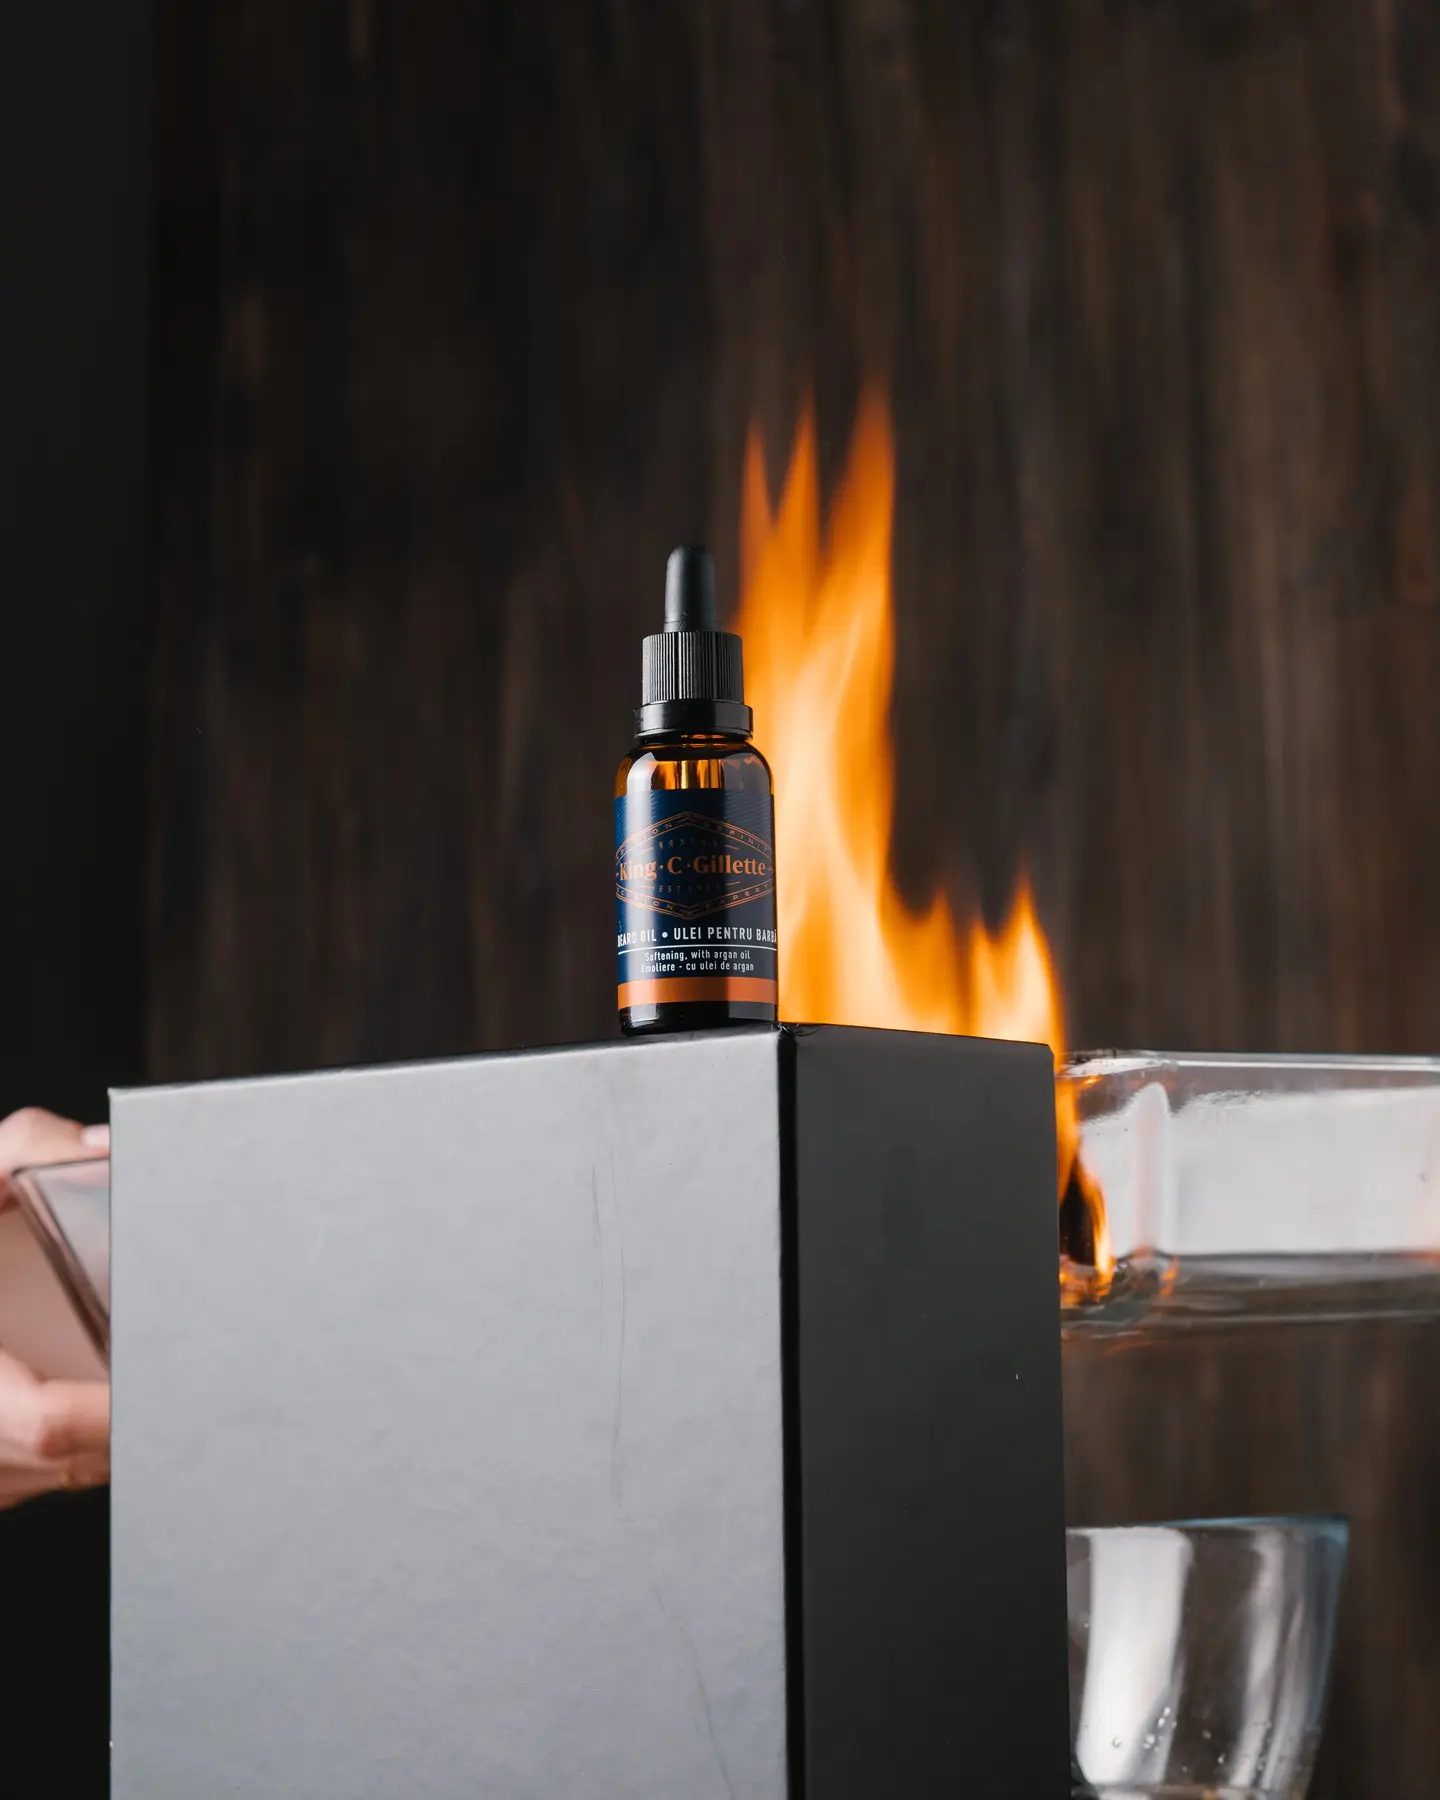 Right Fire. The photo was taken as a right flame donor. On the black box is a bottle of King C Gillette of beard oil. It is lit from the left side. A wooden background is visible behind the jar and box.